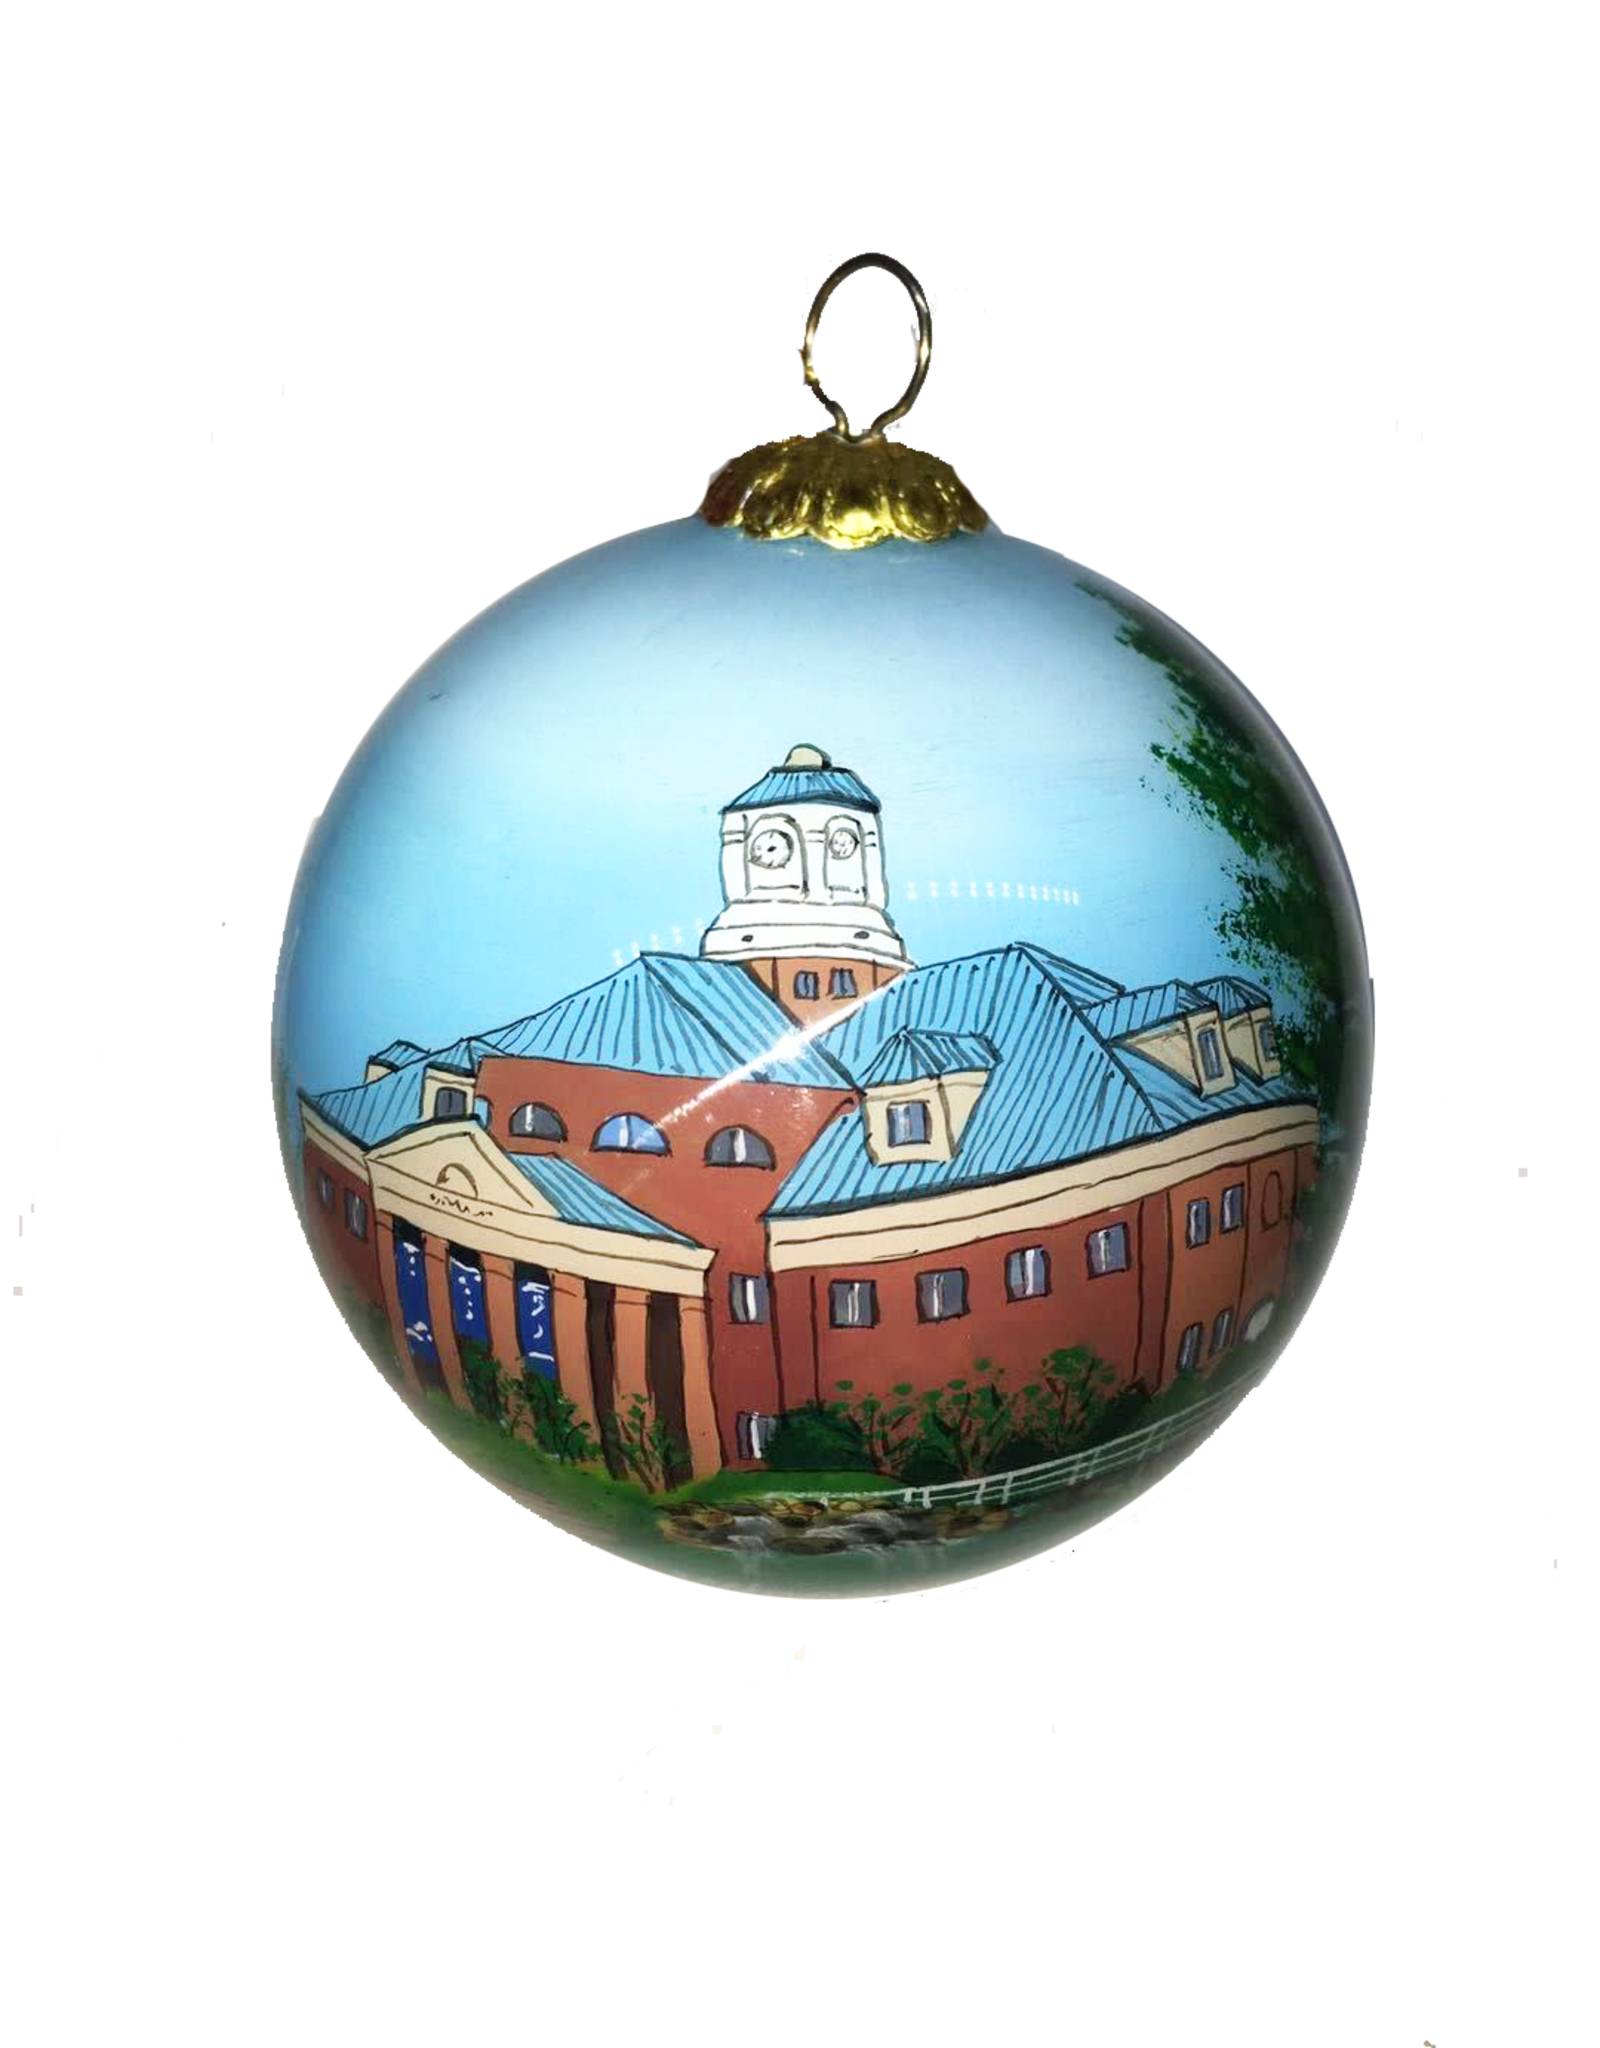 MCM Hand Painted Stegall Ceramic Ball Ornament